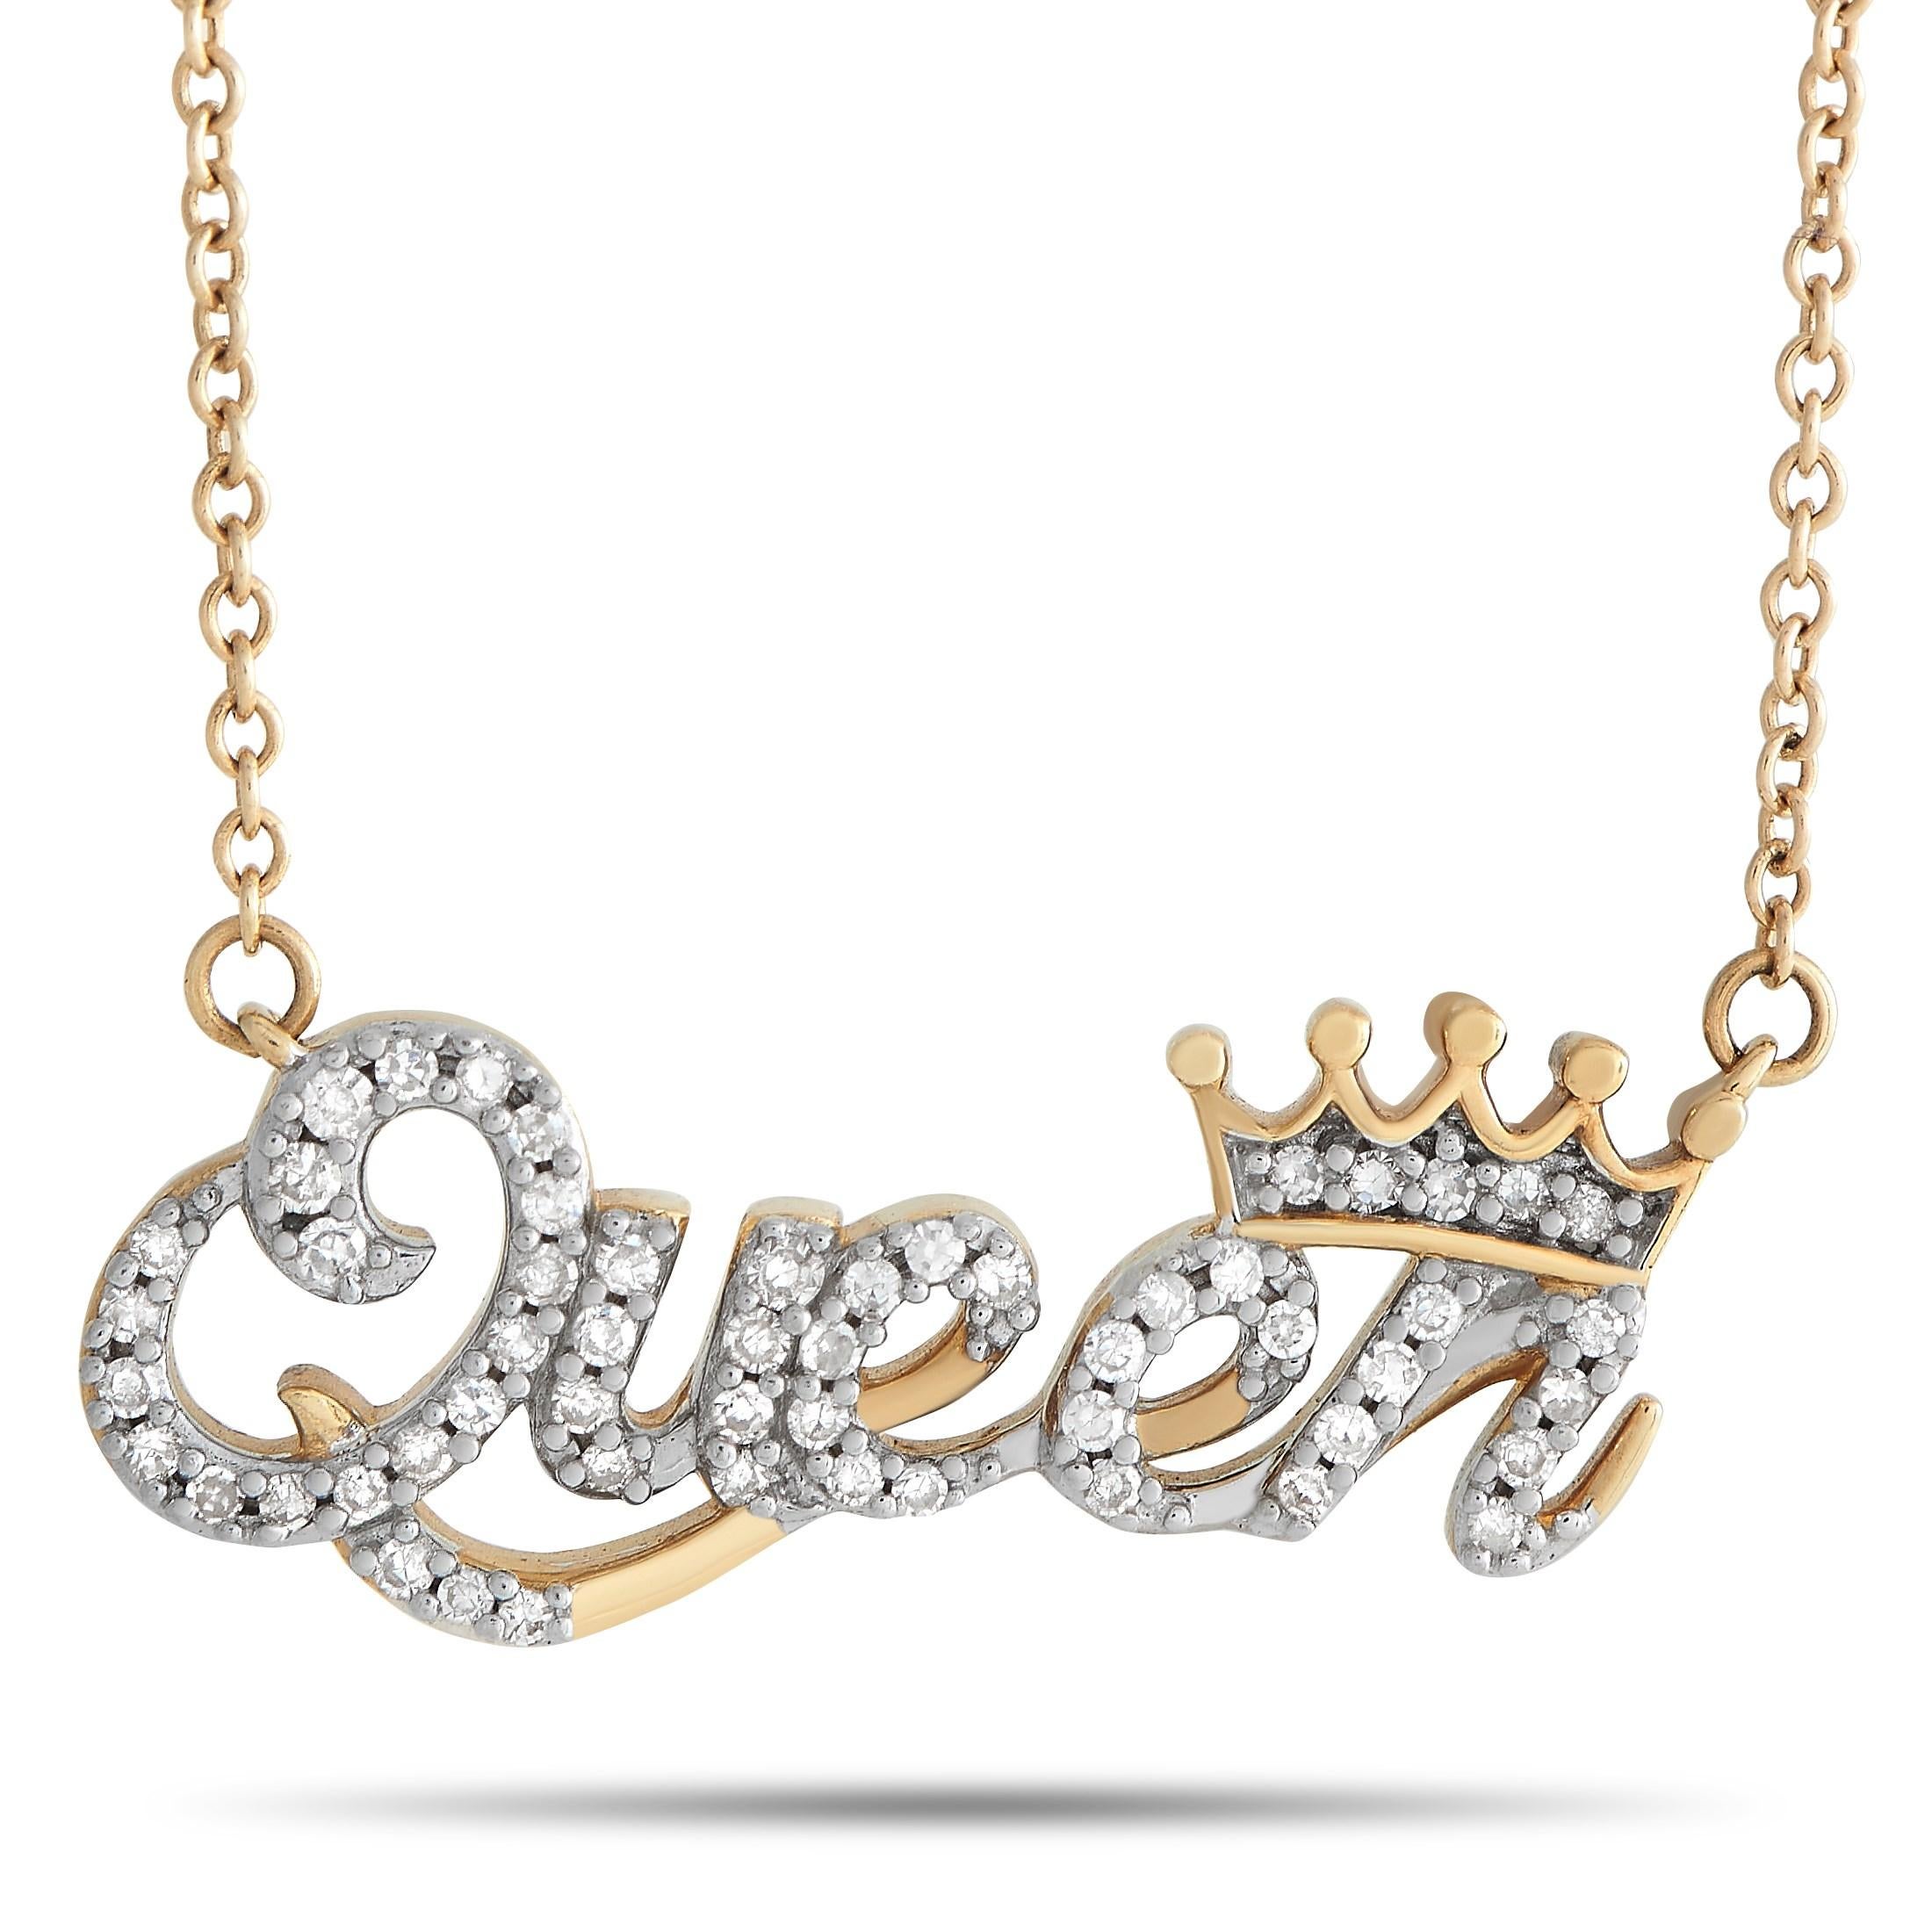 LB Exclusive 14K Yellow Gold 0.15ct Diamond Queen Necklace In New Condition For Sale In Southampton, PA